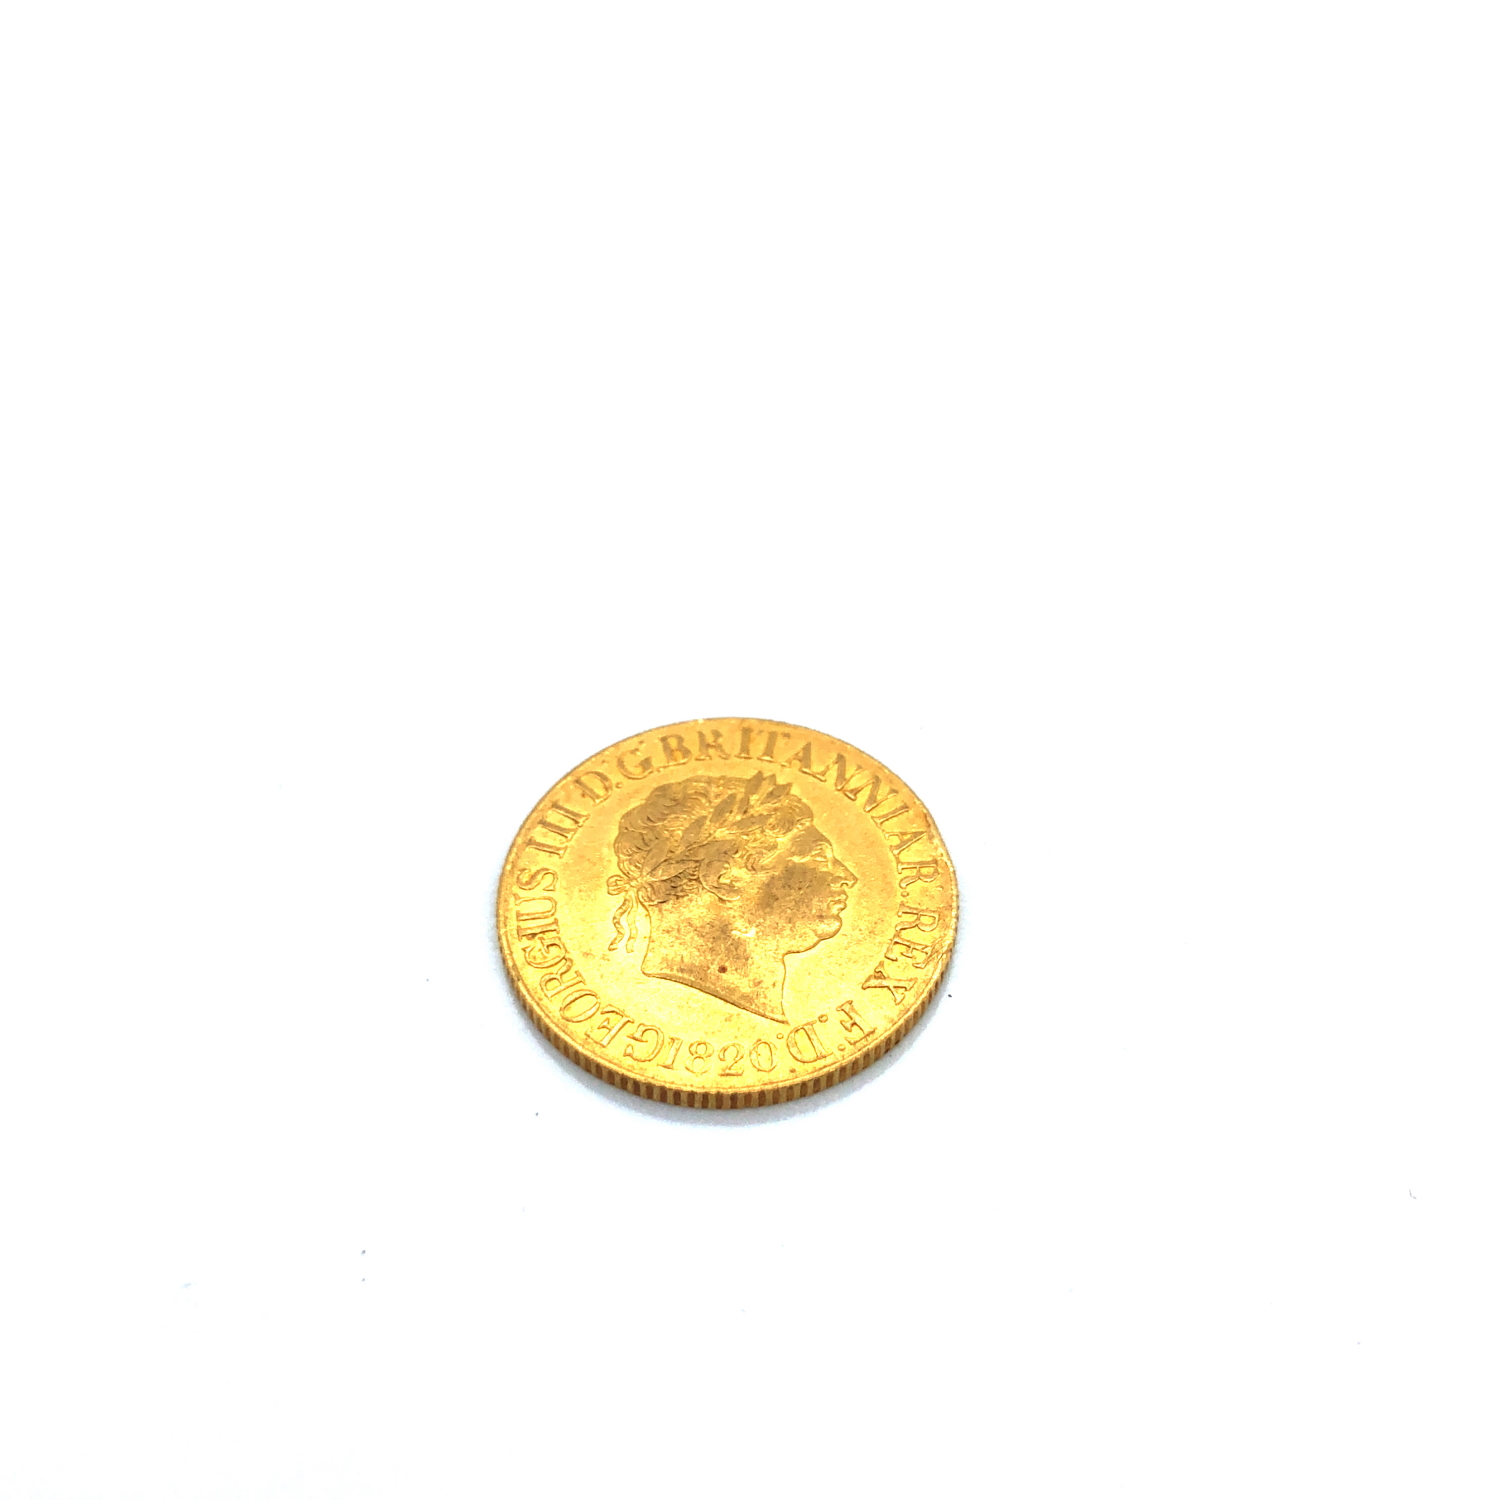 A KING GEORGE III GOLD SOVEREIGN COIN DATED 1820, STRUK BY THE BRITISH ROYAL MINT BEWTEEN 1827- - Image 2 of 2